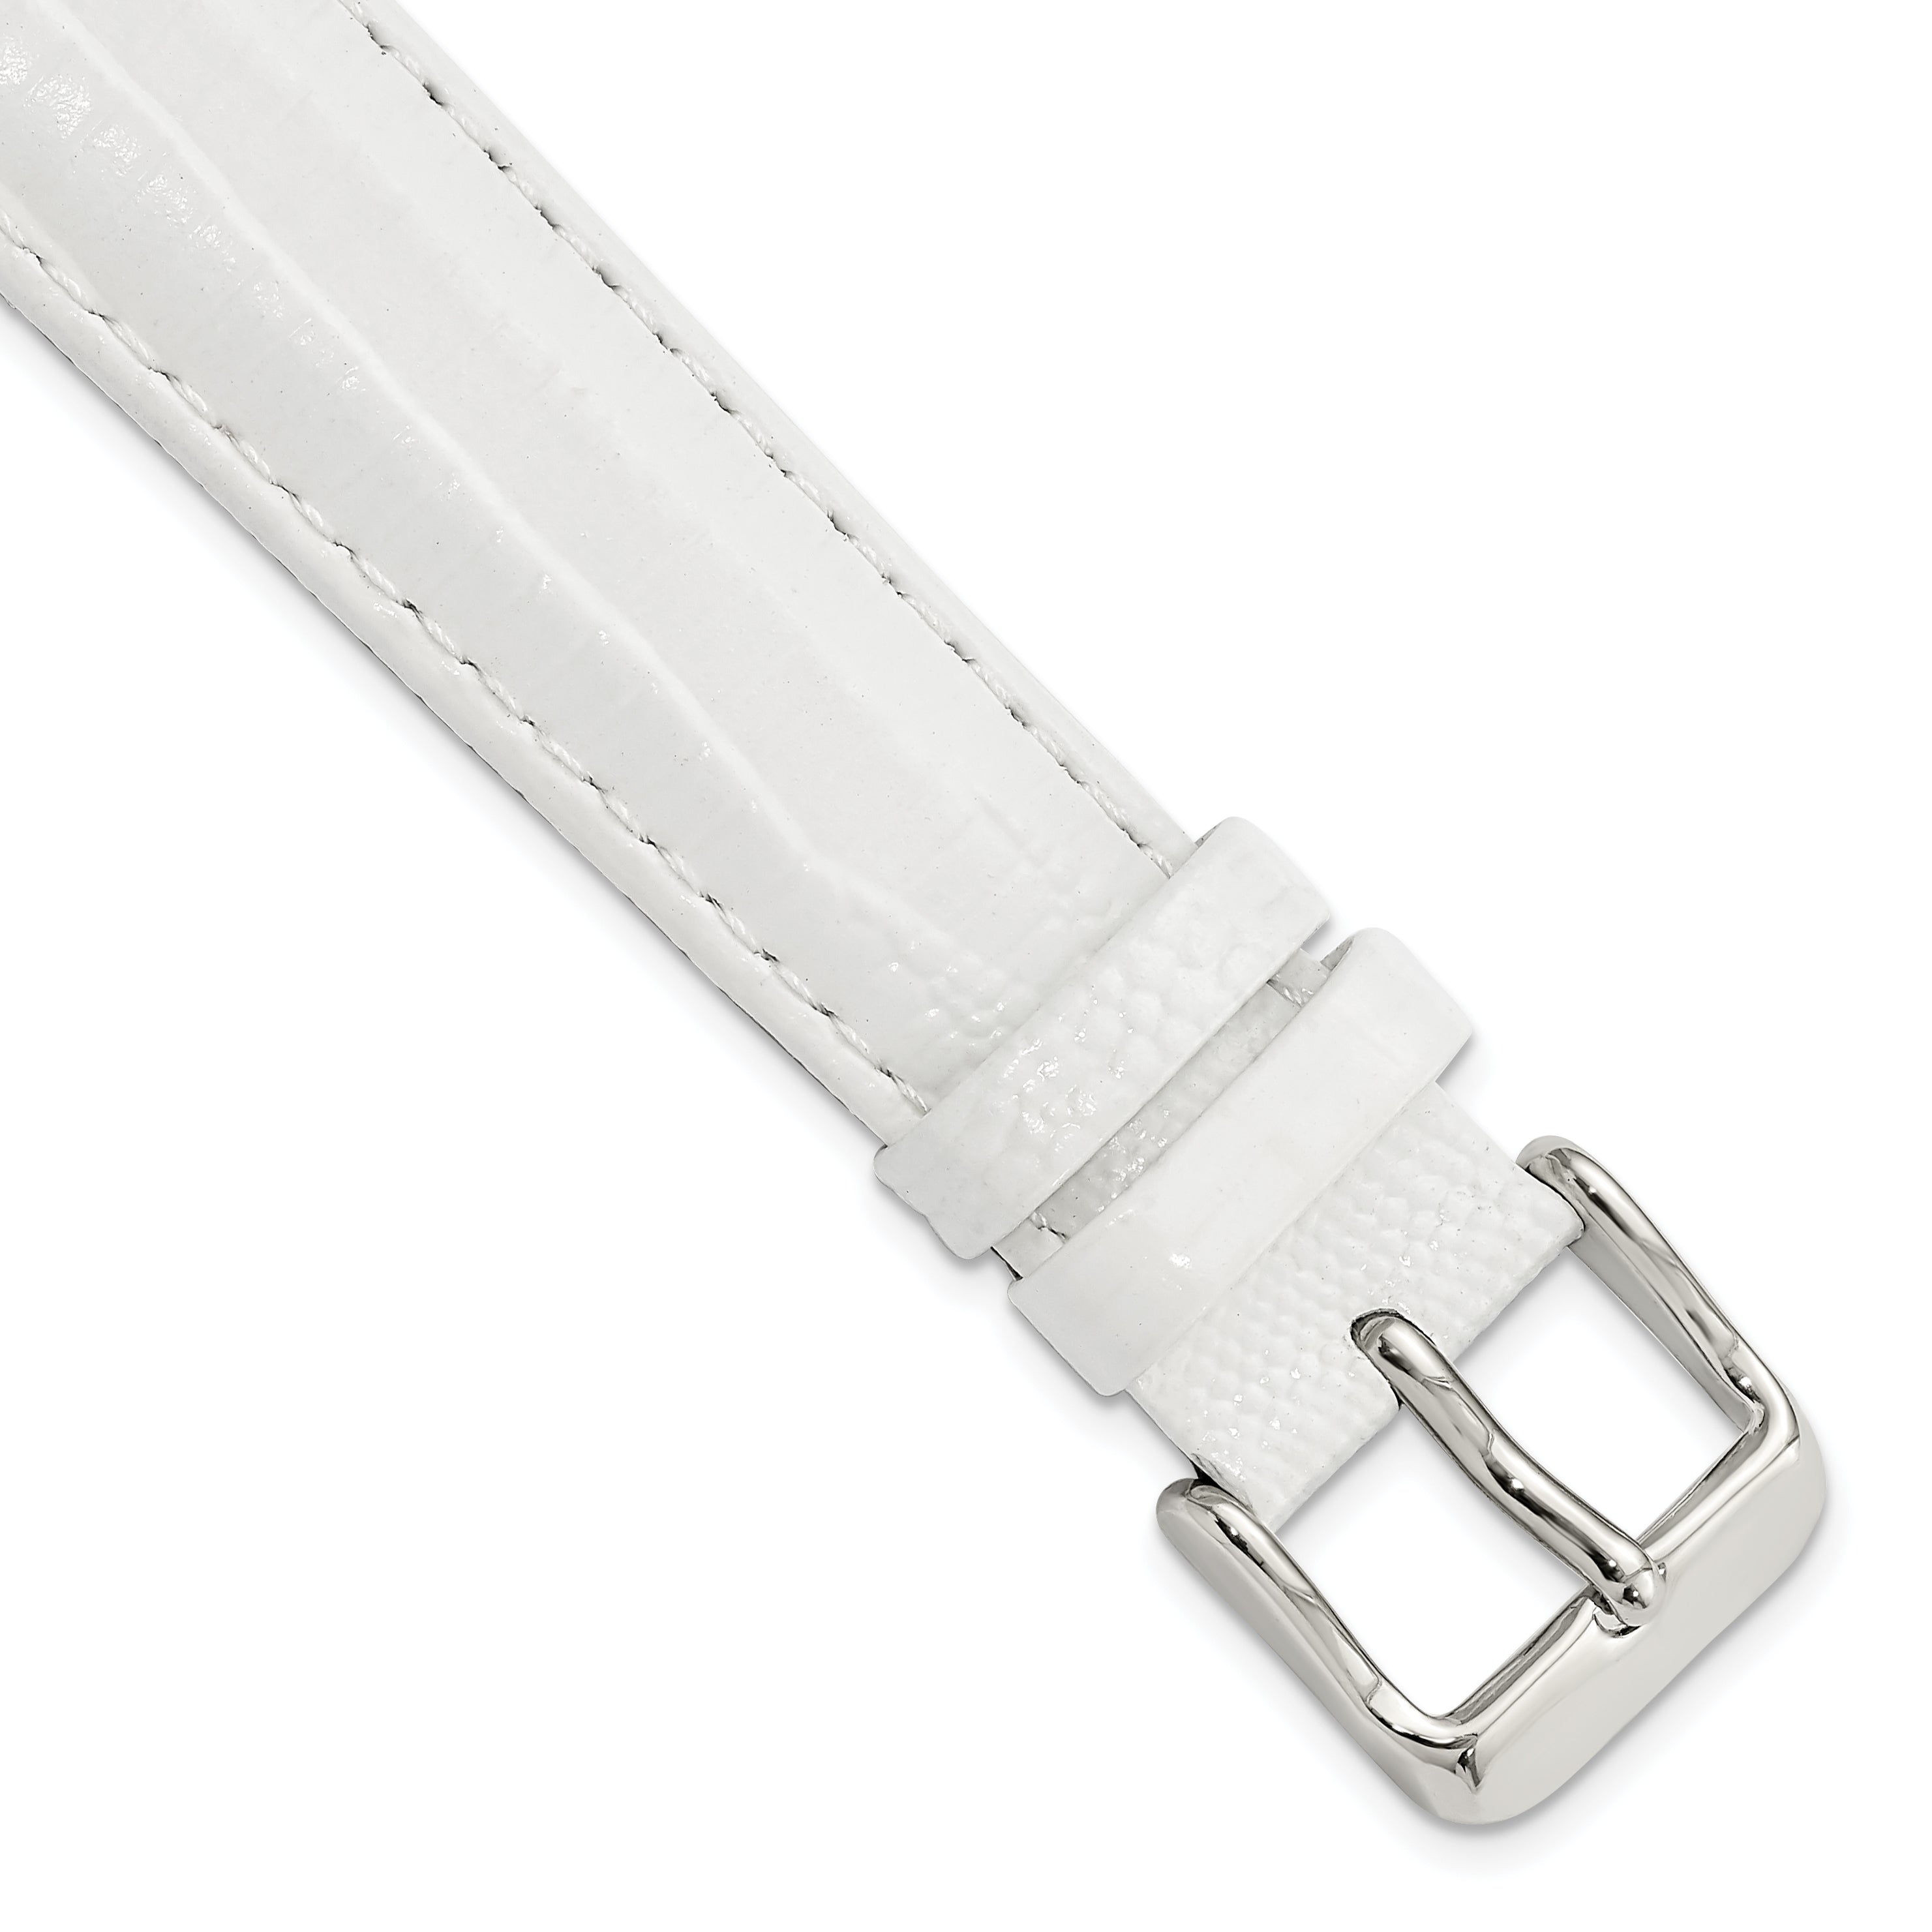 DeBeer 18mm White Teju Liz Grain Leather with Silver-tone Buckle 7.5 inch Watch Band